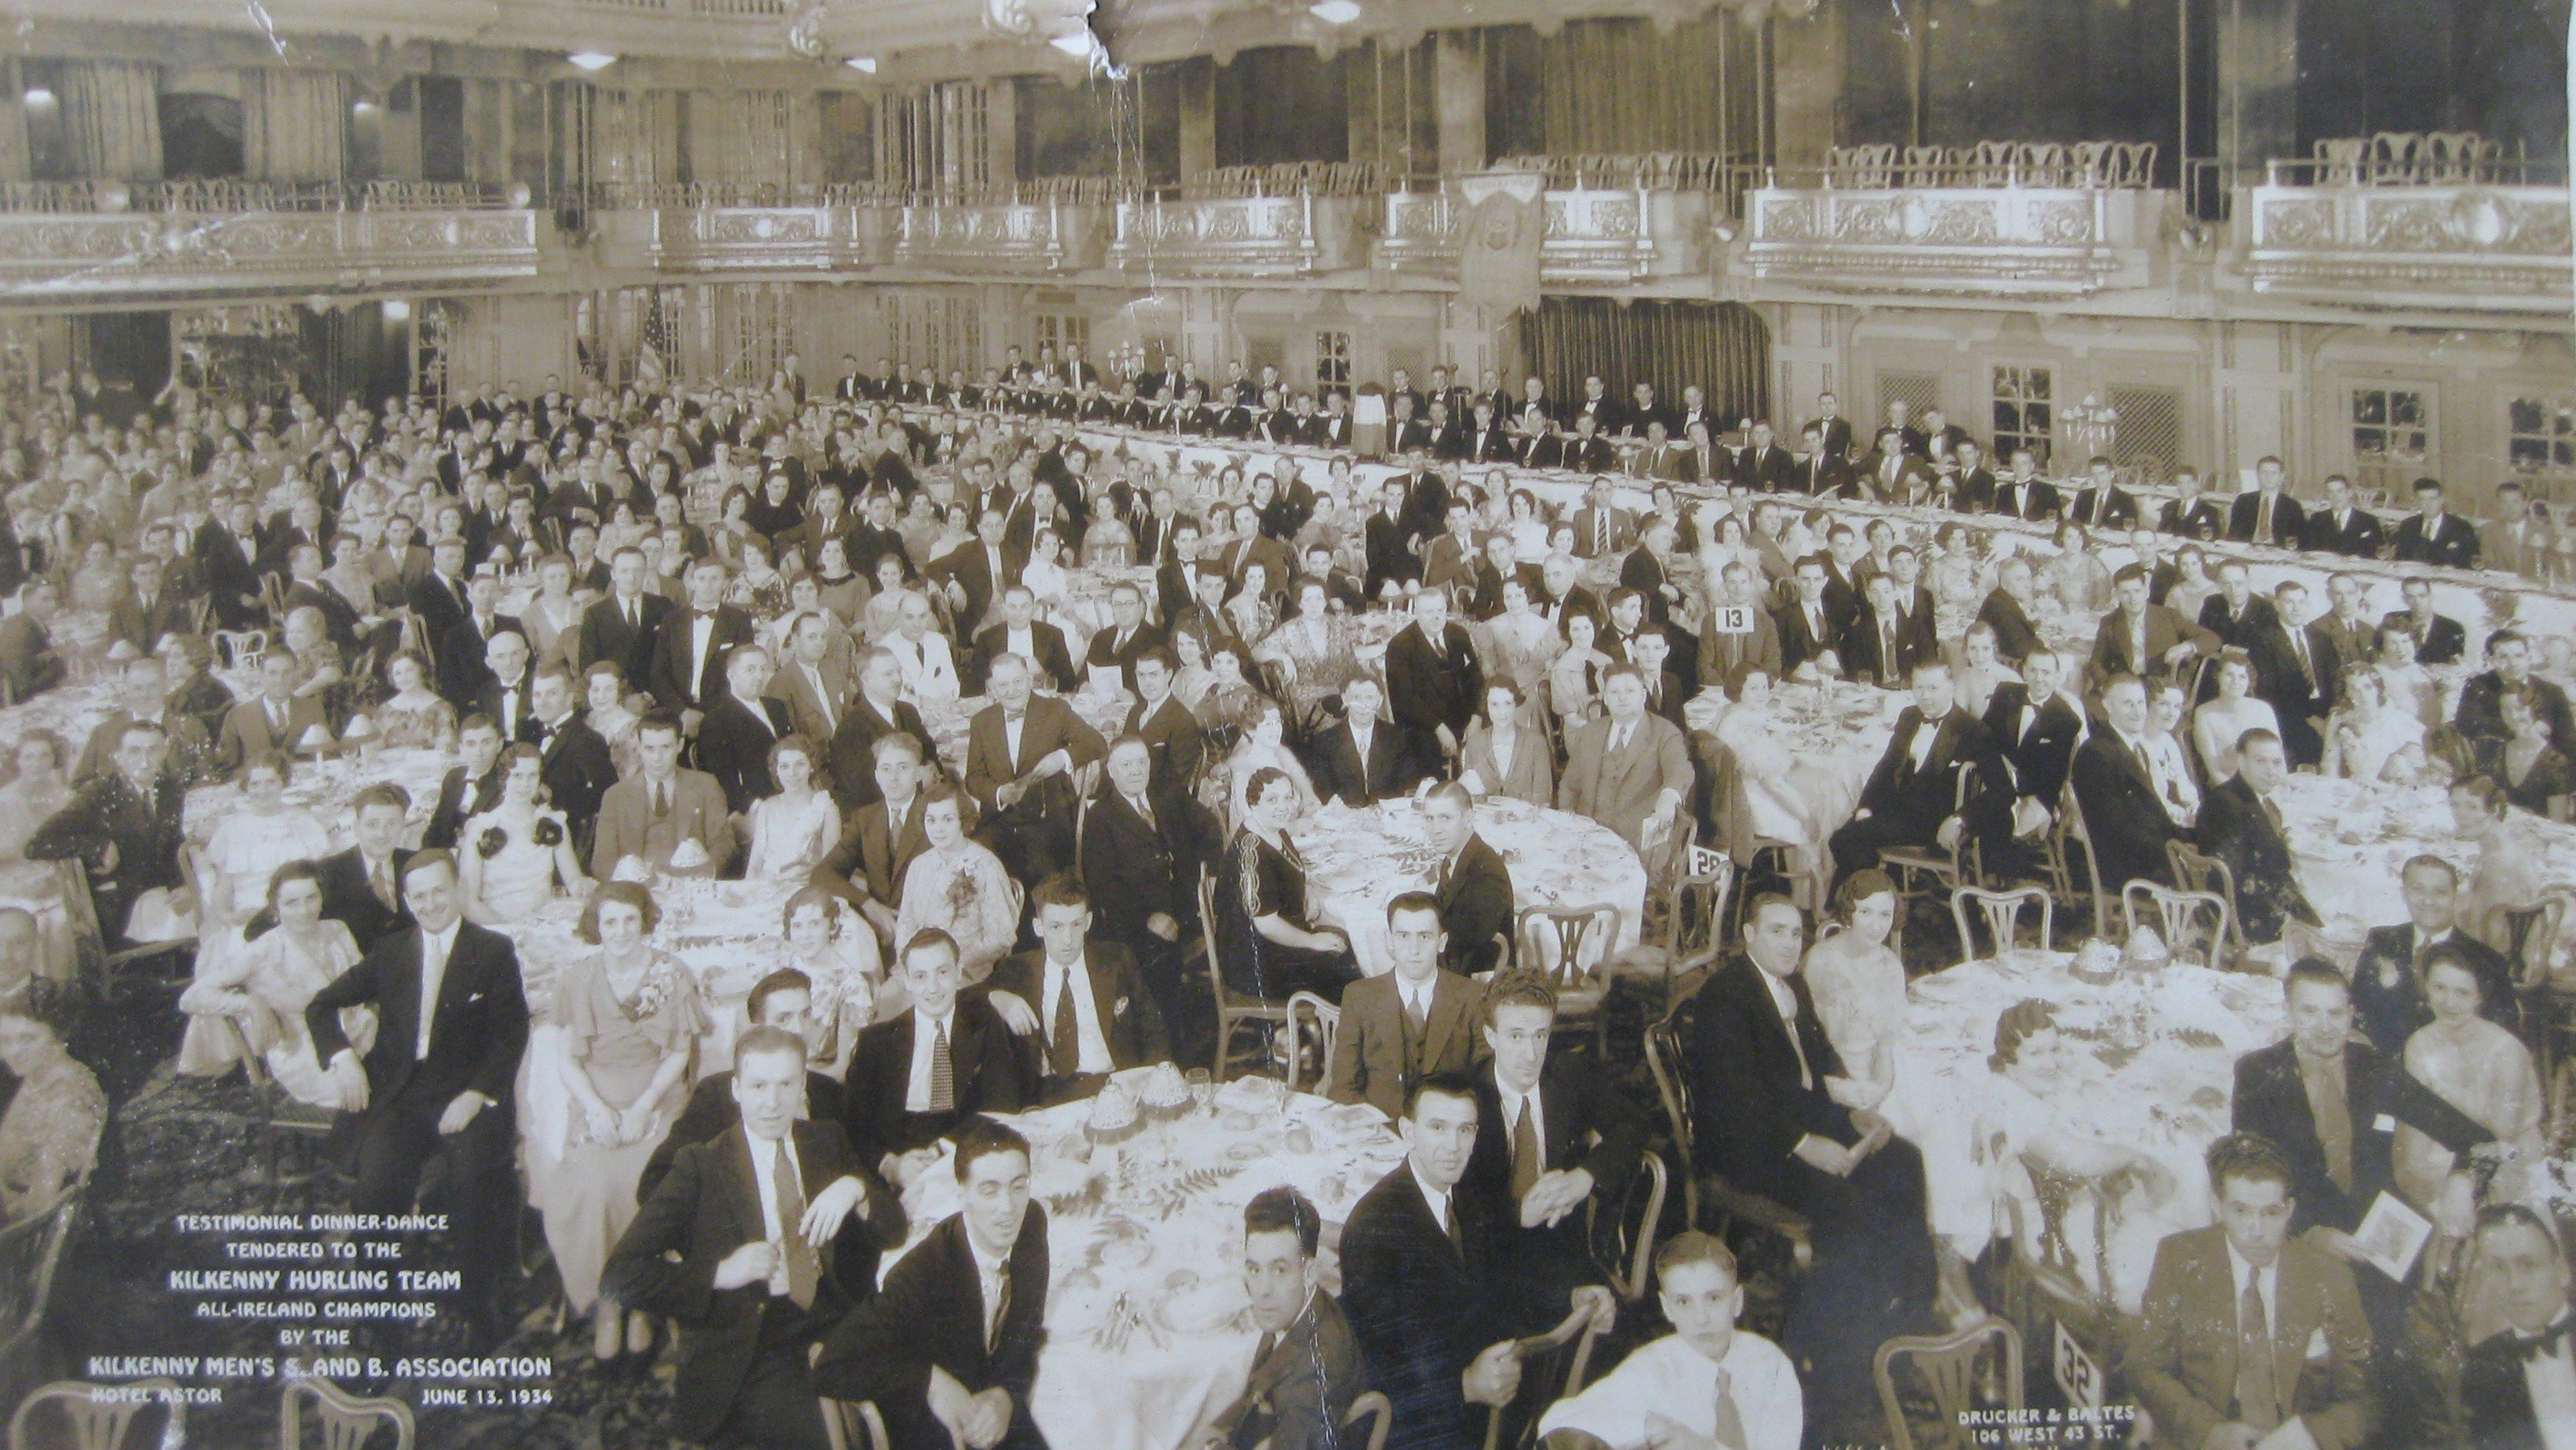 The scene at the Hotel Astor, New York, on the 13th June 1934, when a testimonial dinner-dance was held for the All-Ireland winning Kilkenny Hurling Team by the Kilkenny Men's Association.